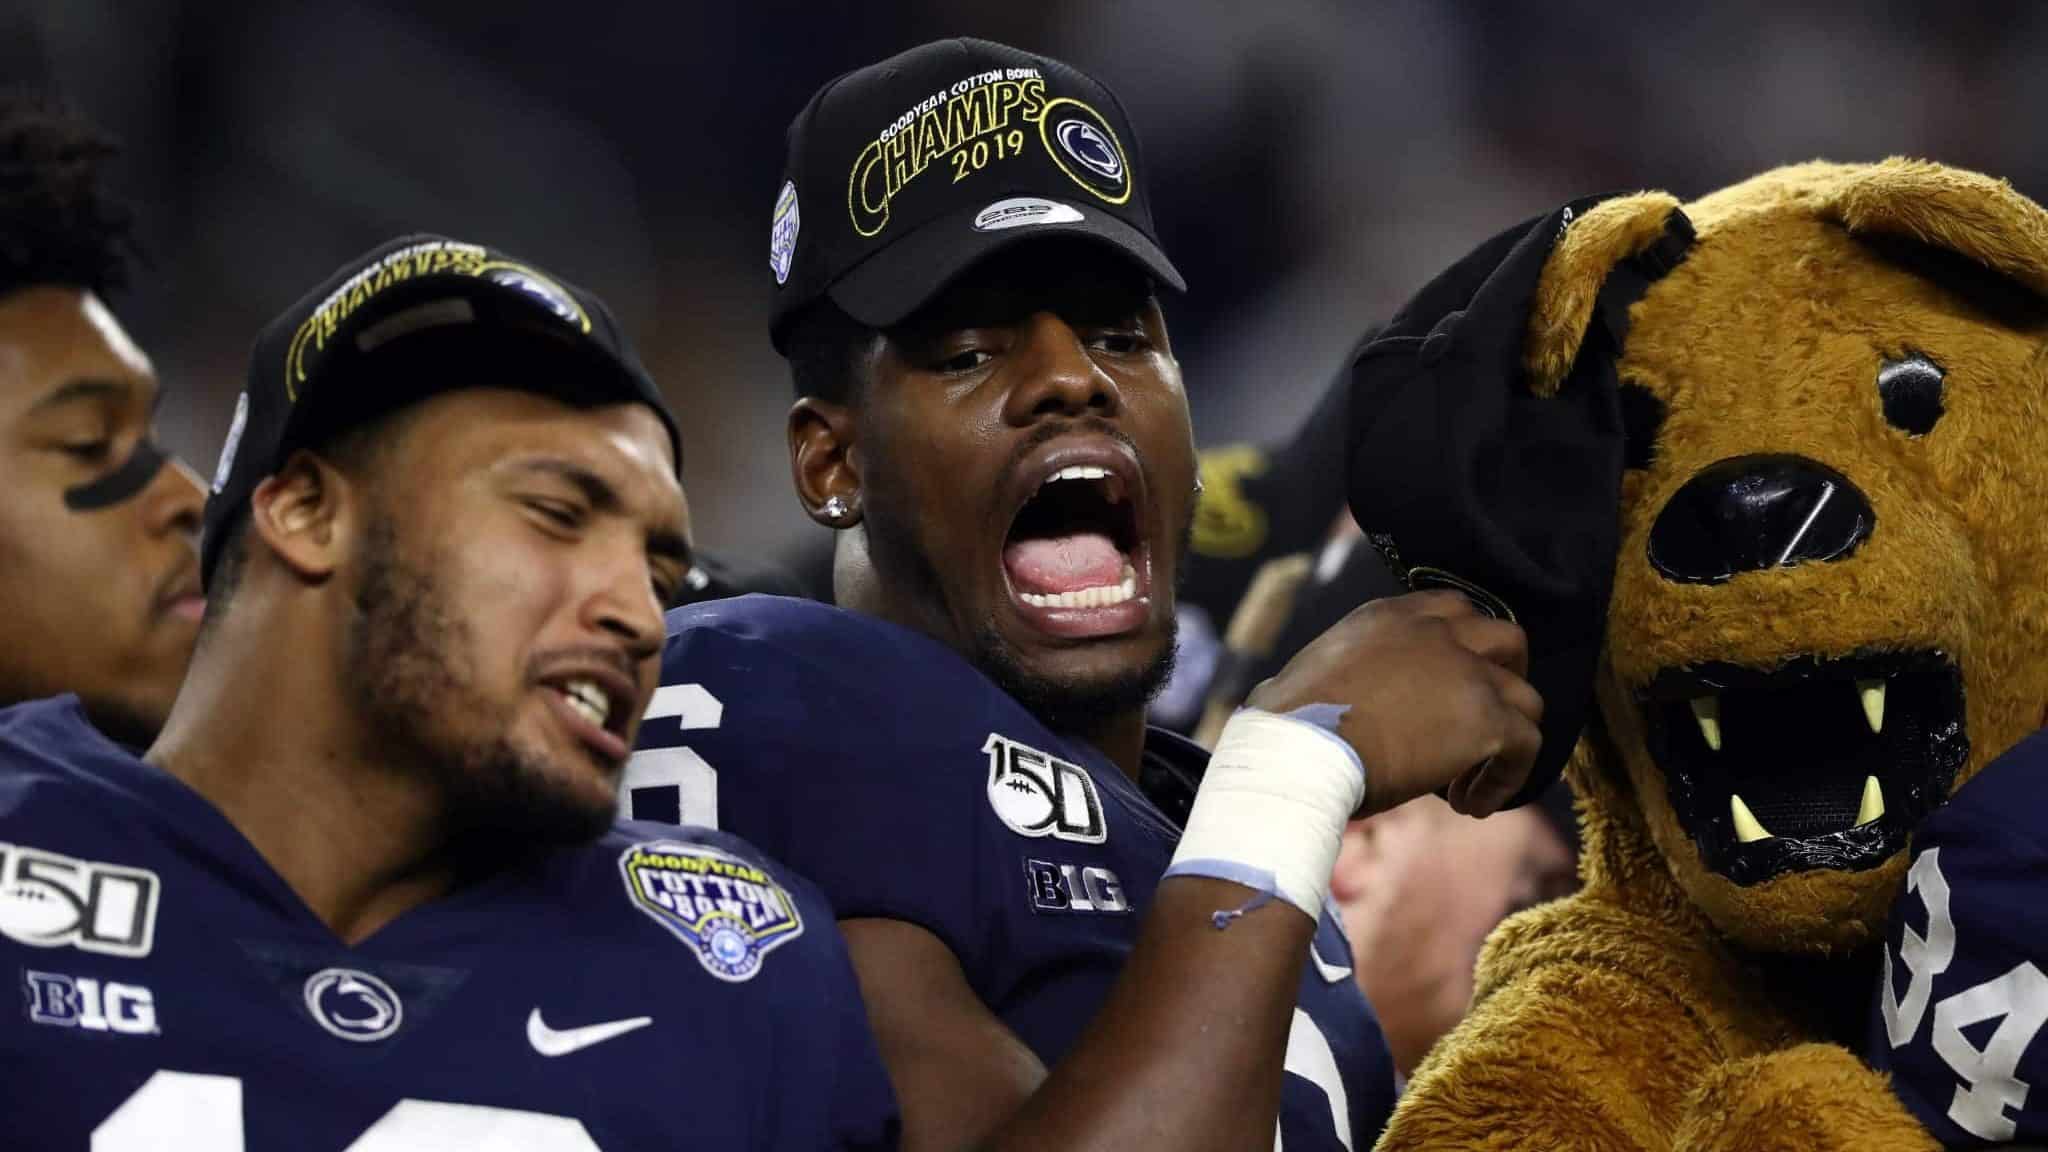 ARLINGTON, TEXAS - DECEMBER 28: Cam Brown #6 of the Penn State Nittany Lions celebrates after a 53-39 win in the Goodyear Cotton Bowl Classic against the Memphis Tigers at AT&T Stadium on December 28, 2019 in Arlington, Texas.